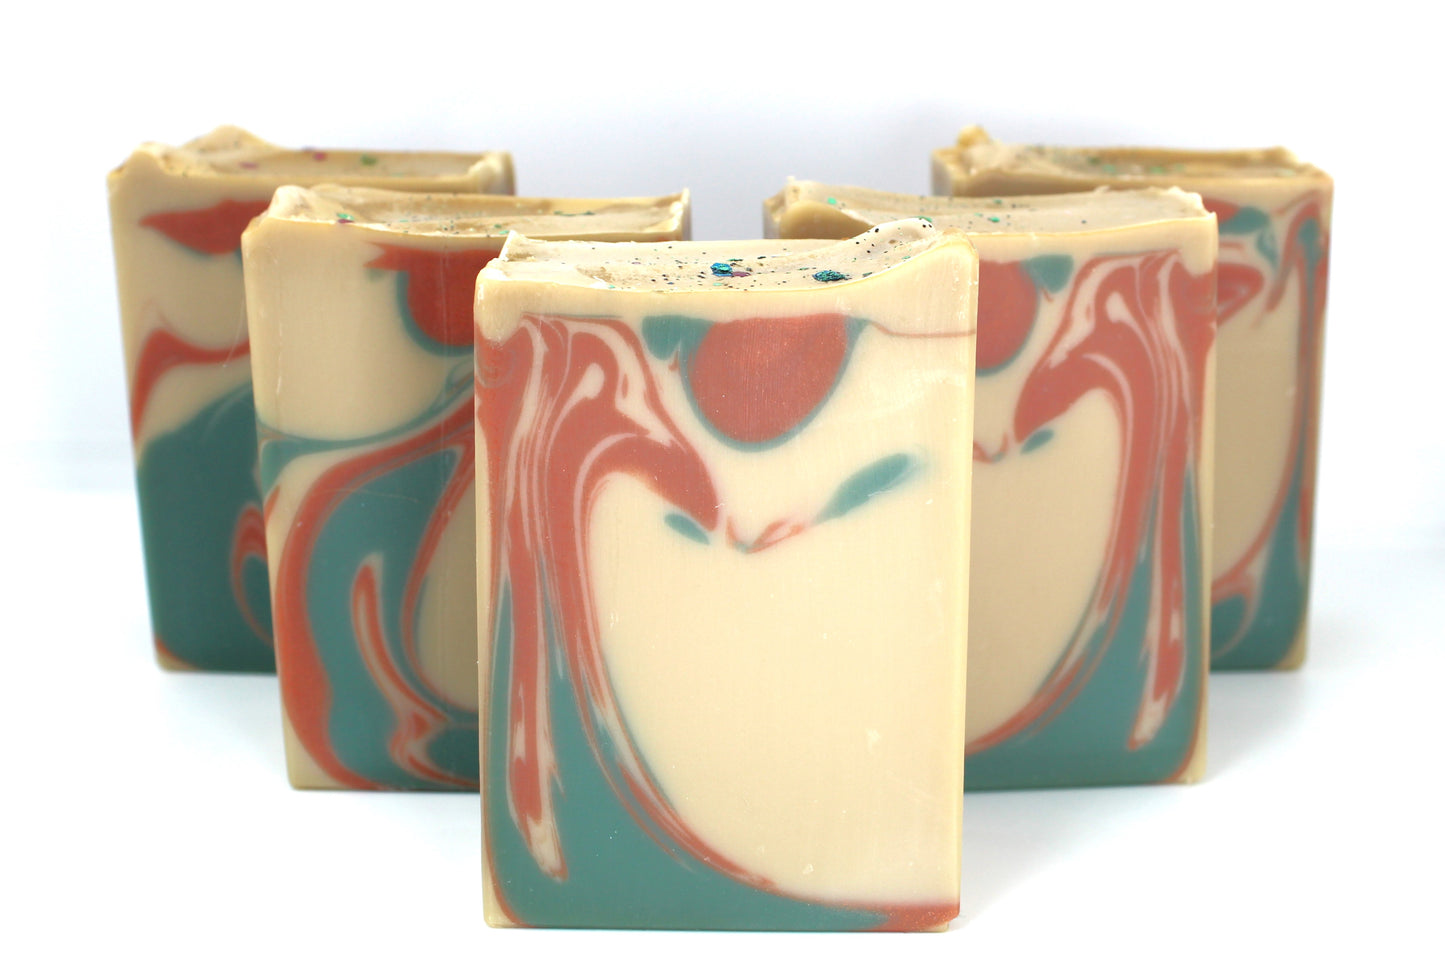 Staggered bars of tan colored soap with copper and green swirls on white background.